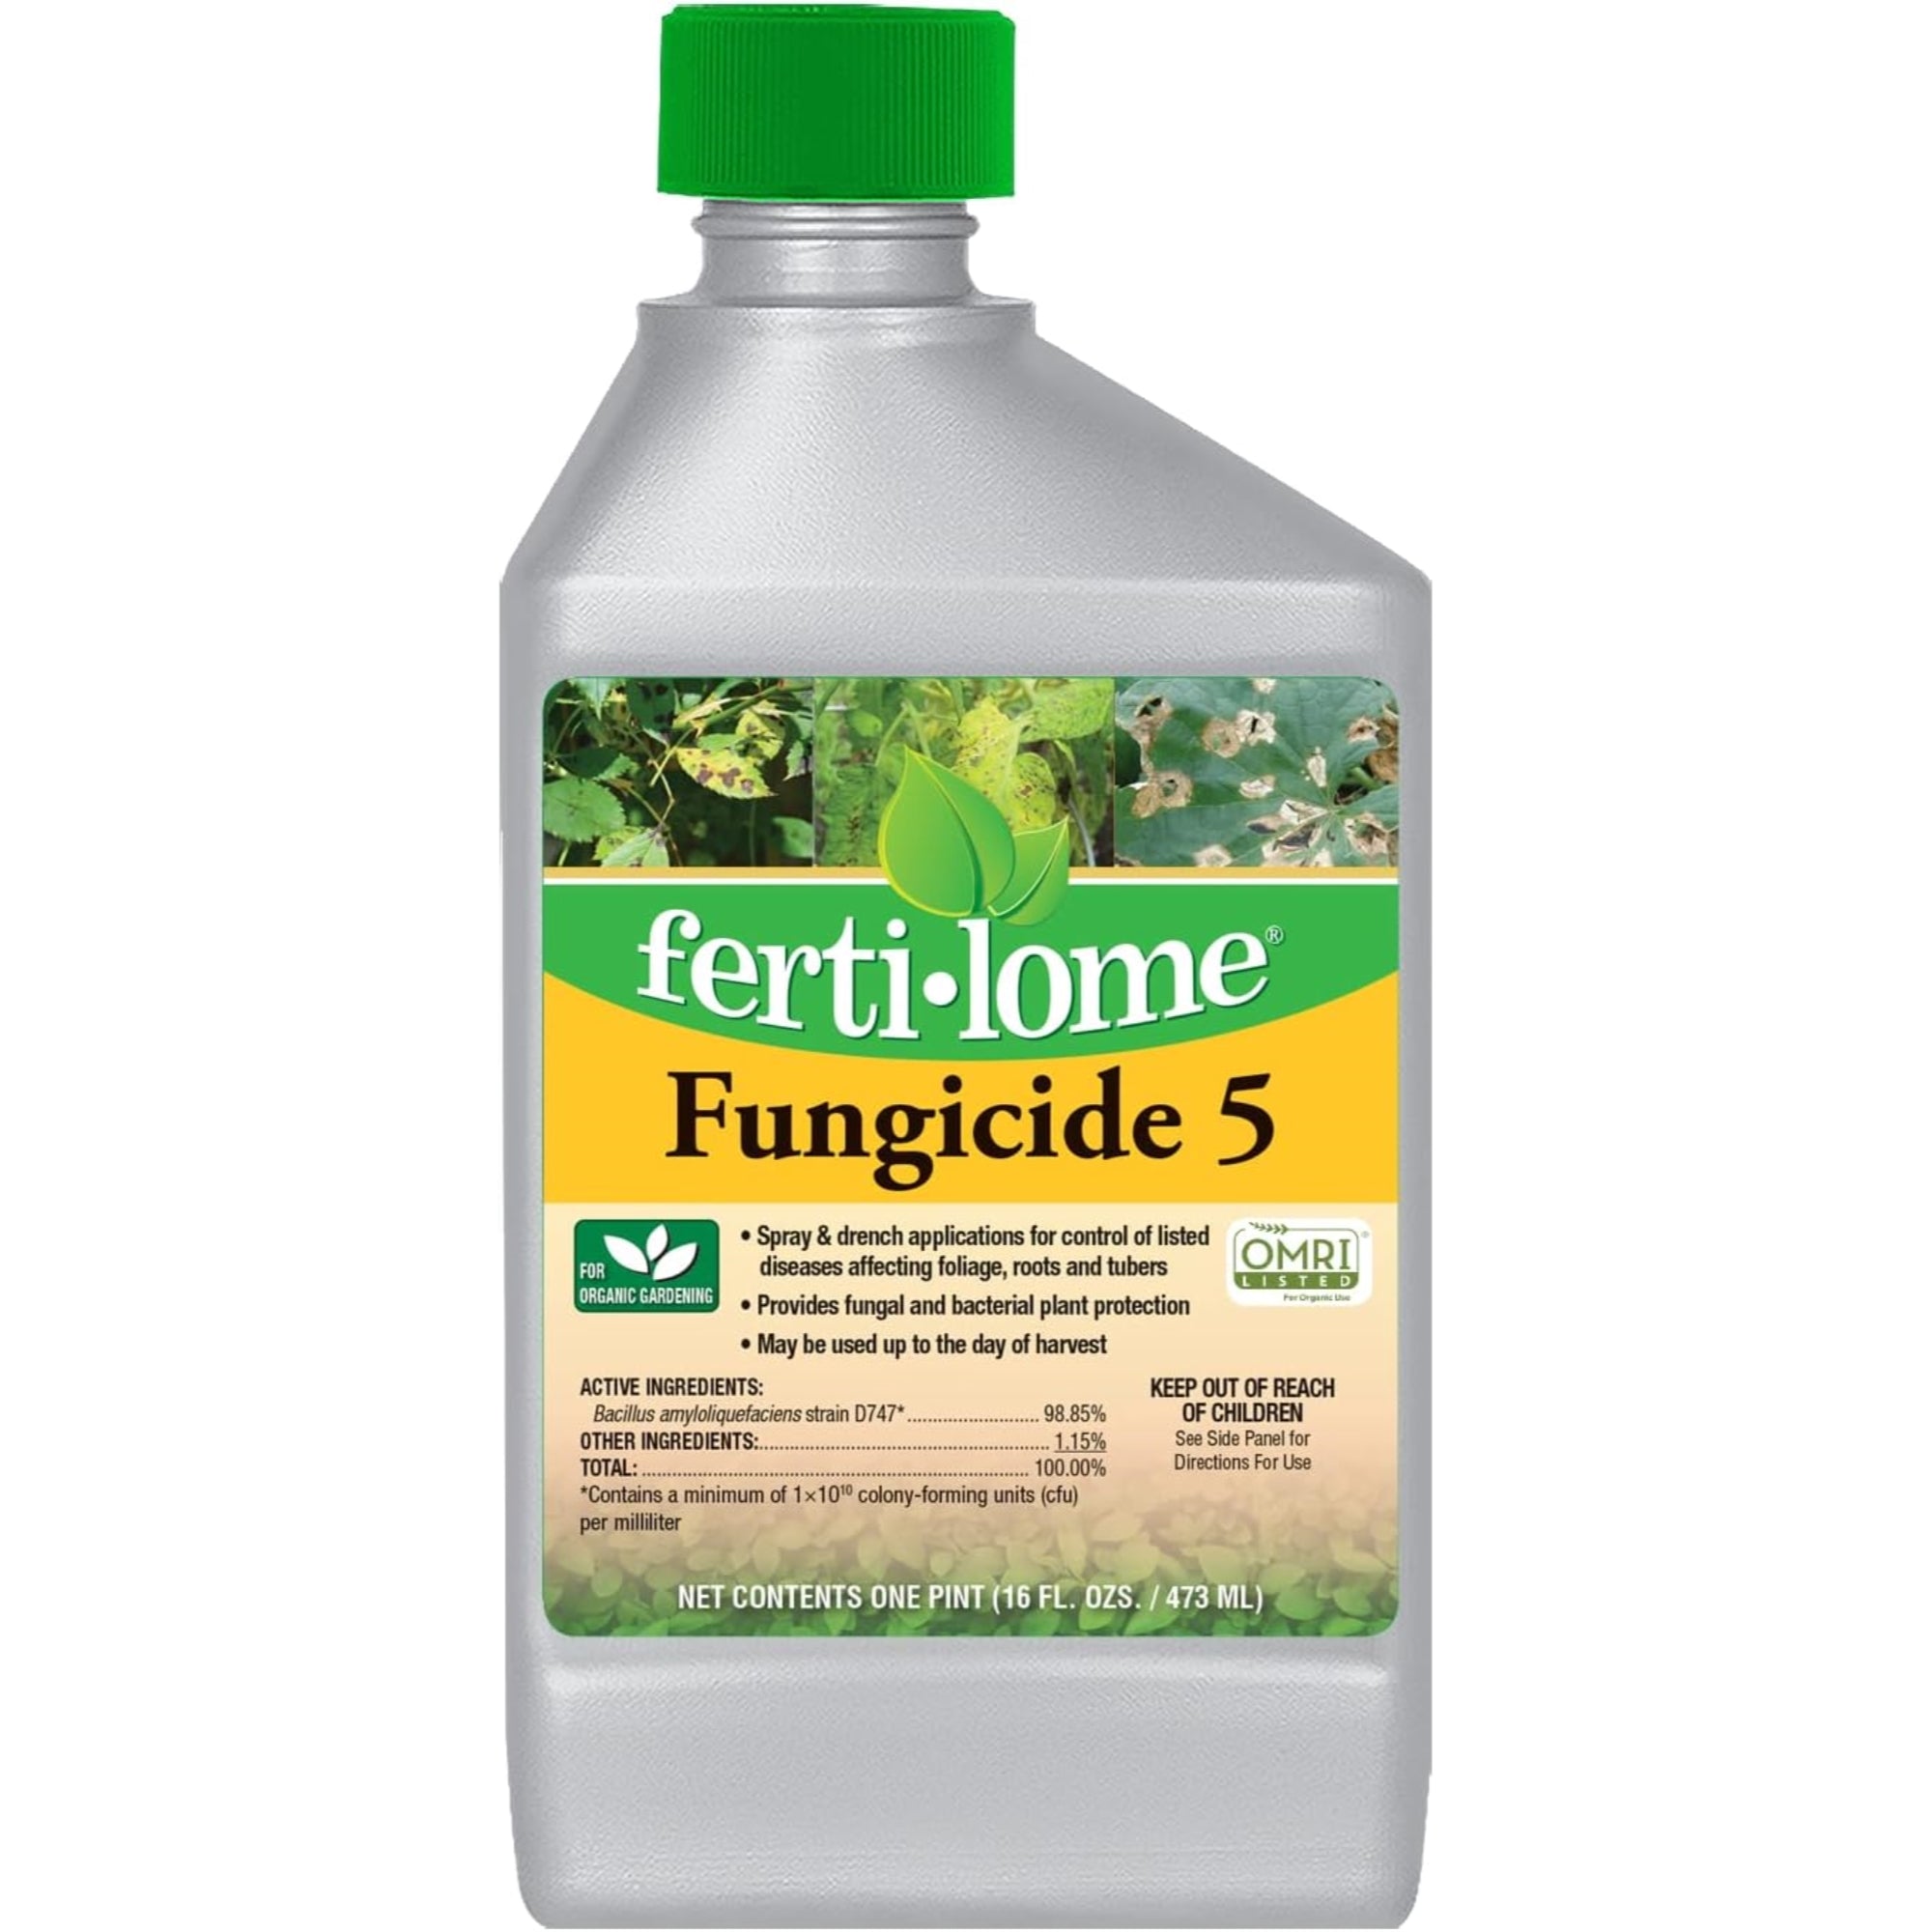 Fertilome Fungicide 5 Concentrate, Plant Disease and Bacteria Control, OMRI Listed, 16 oz